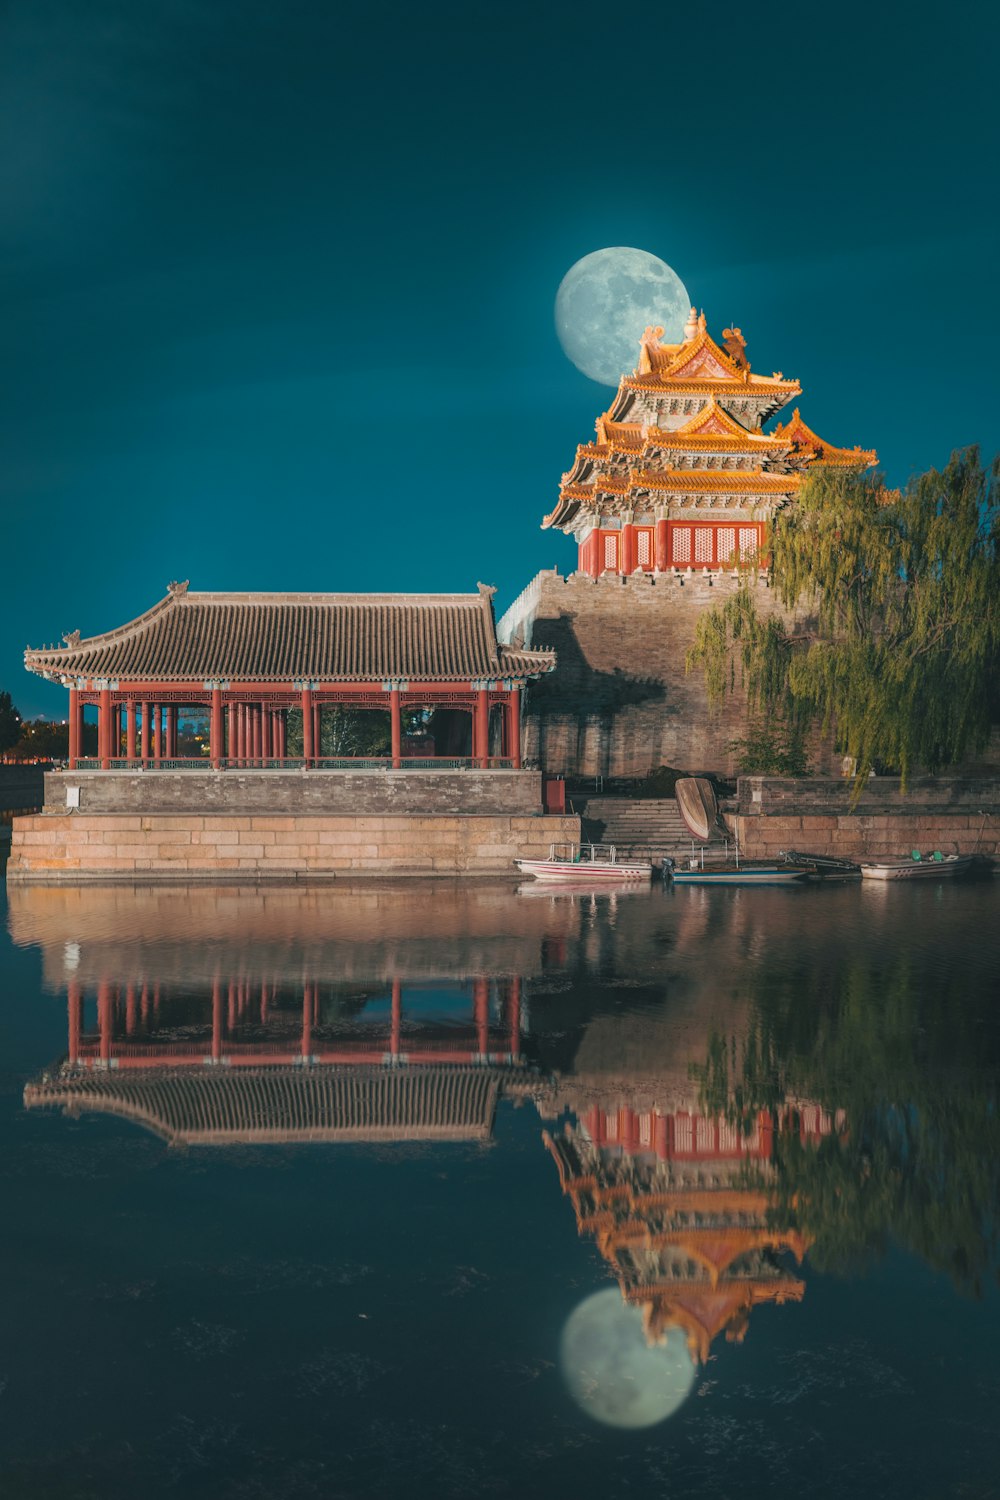 red and brown temple near body of water during daytime